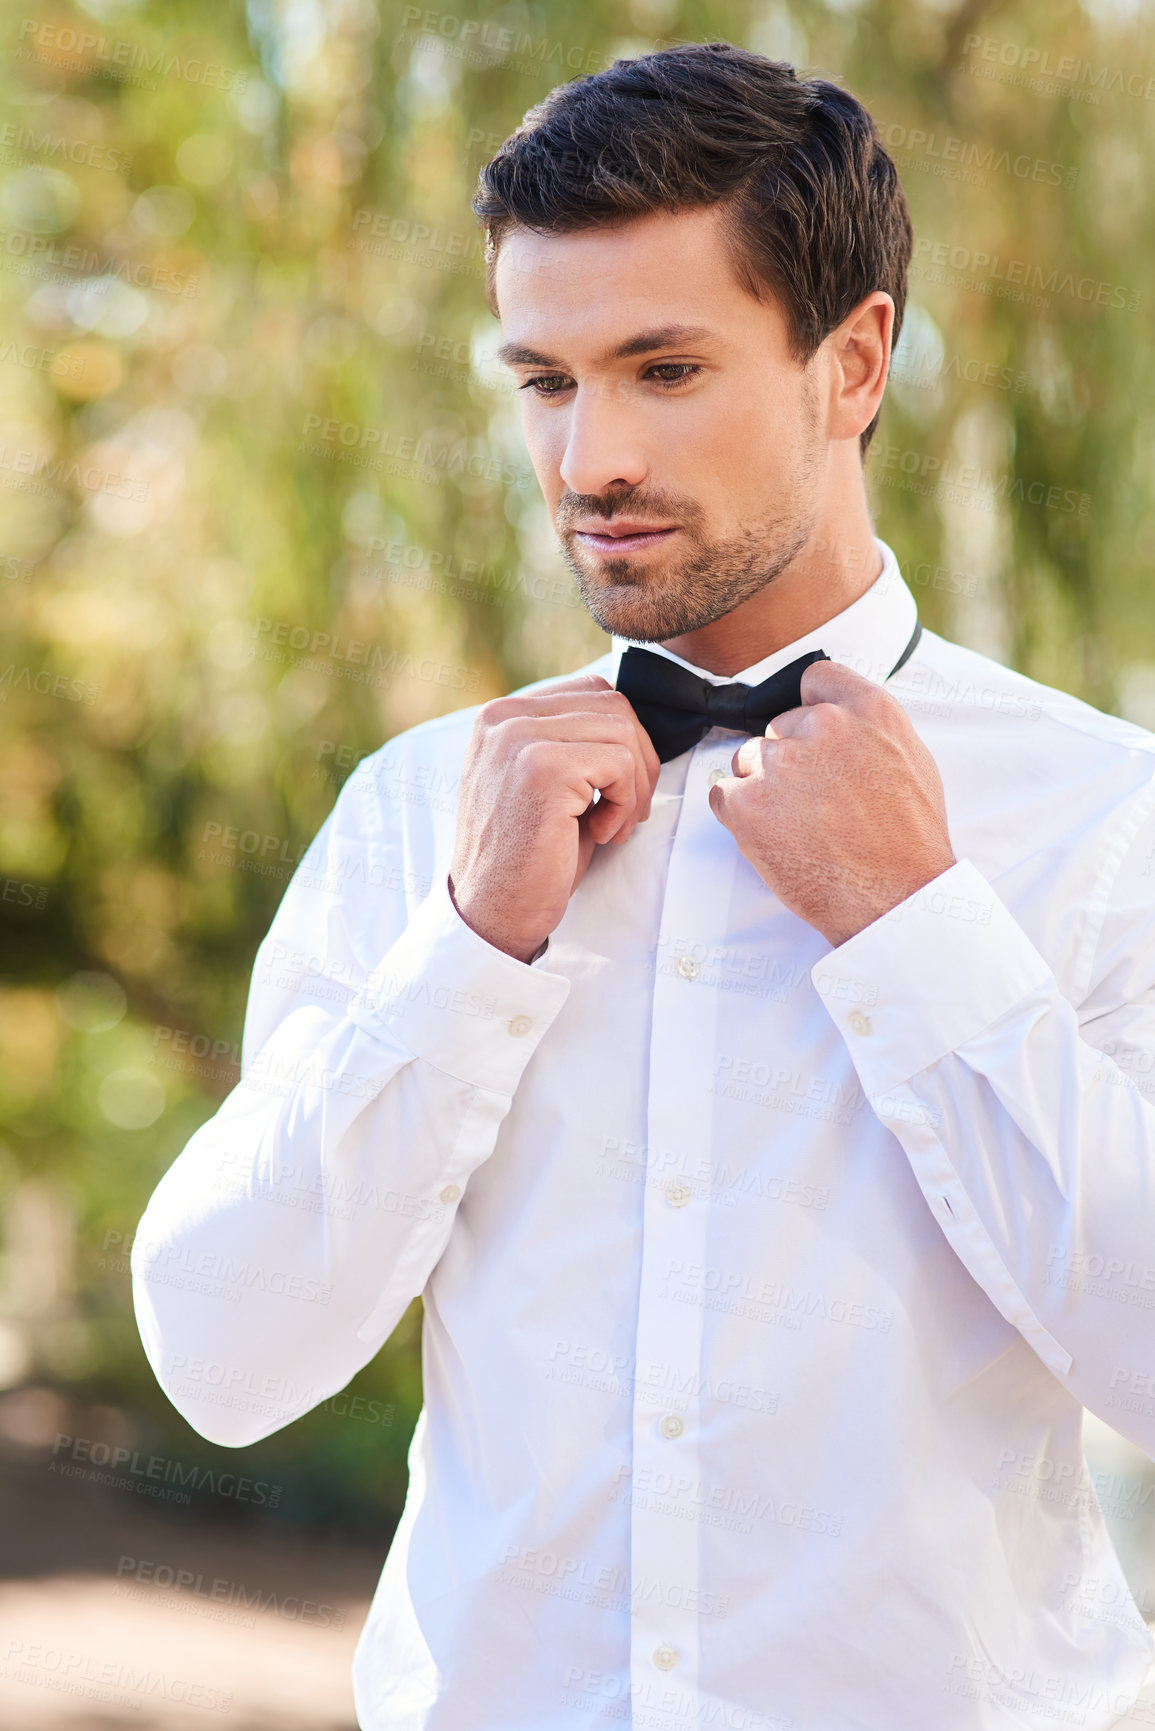 Buy stock photo Shot of a handsome young bridegroom putting on a bowtie while standing outdoors on his wedding day